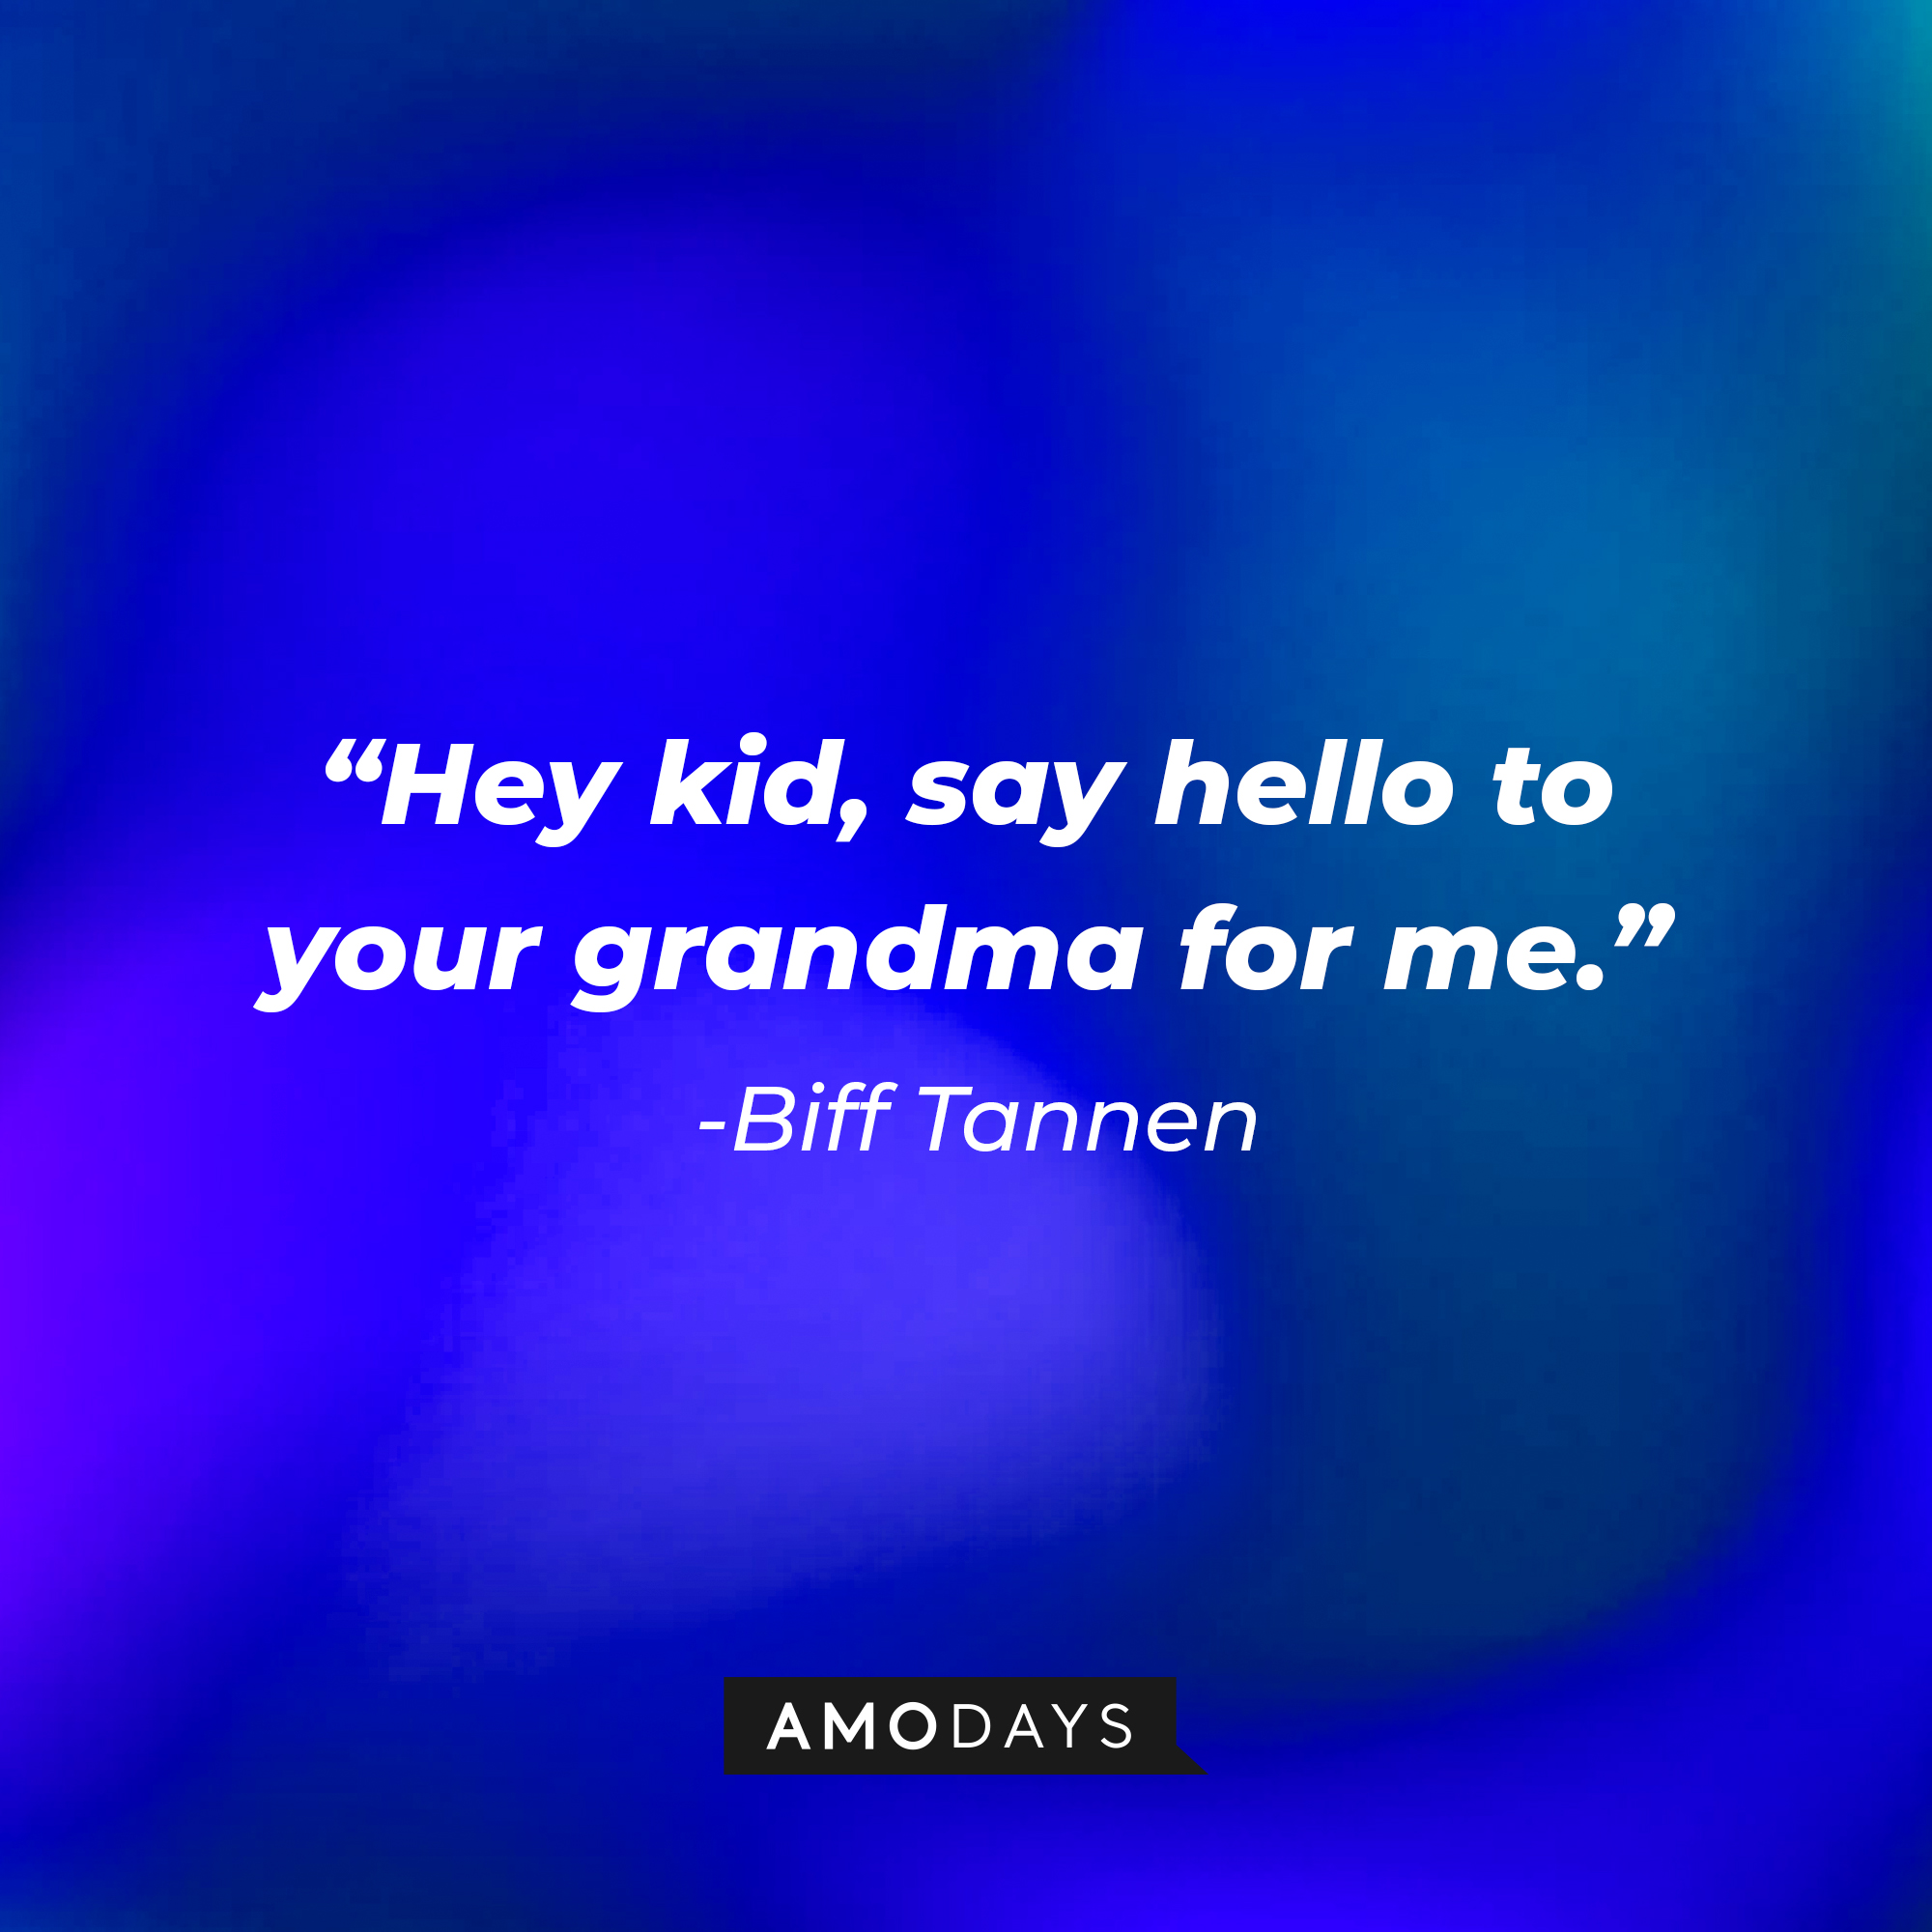 Biff Tannen’s quote: “Hey kid, say hello to your grandma for me.” | Source: AmoDays